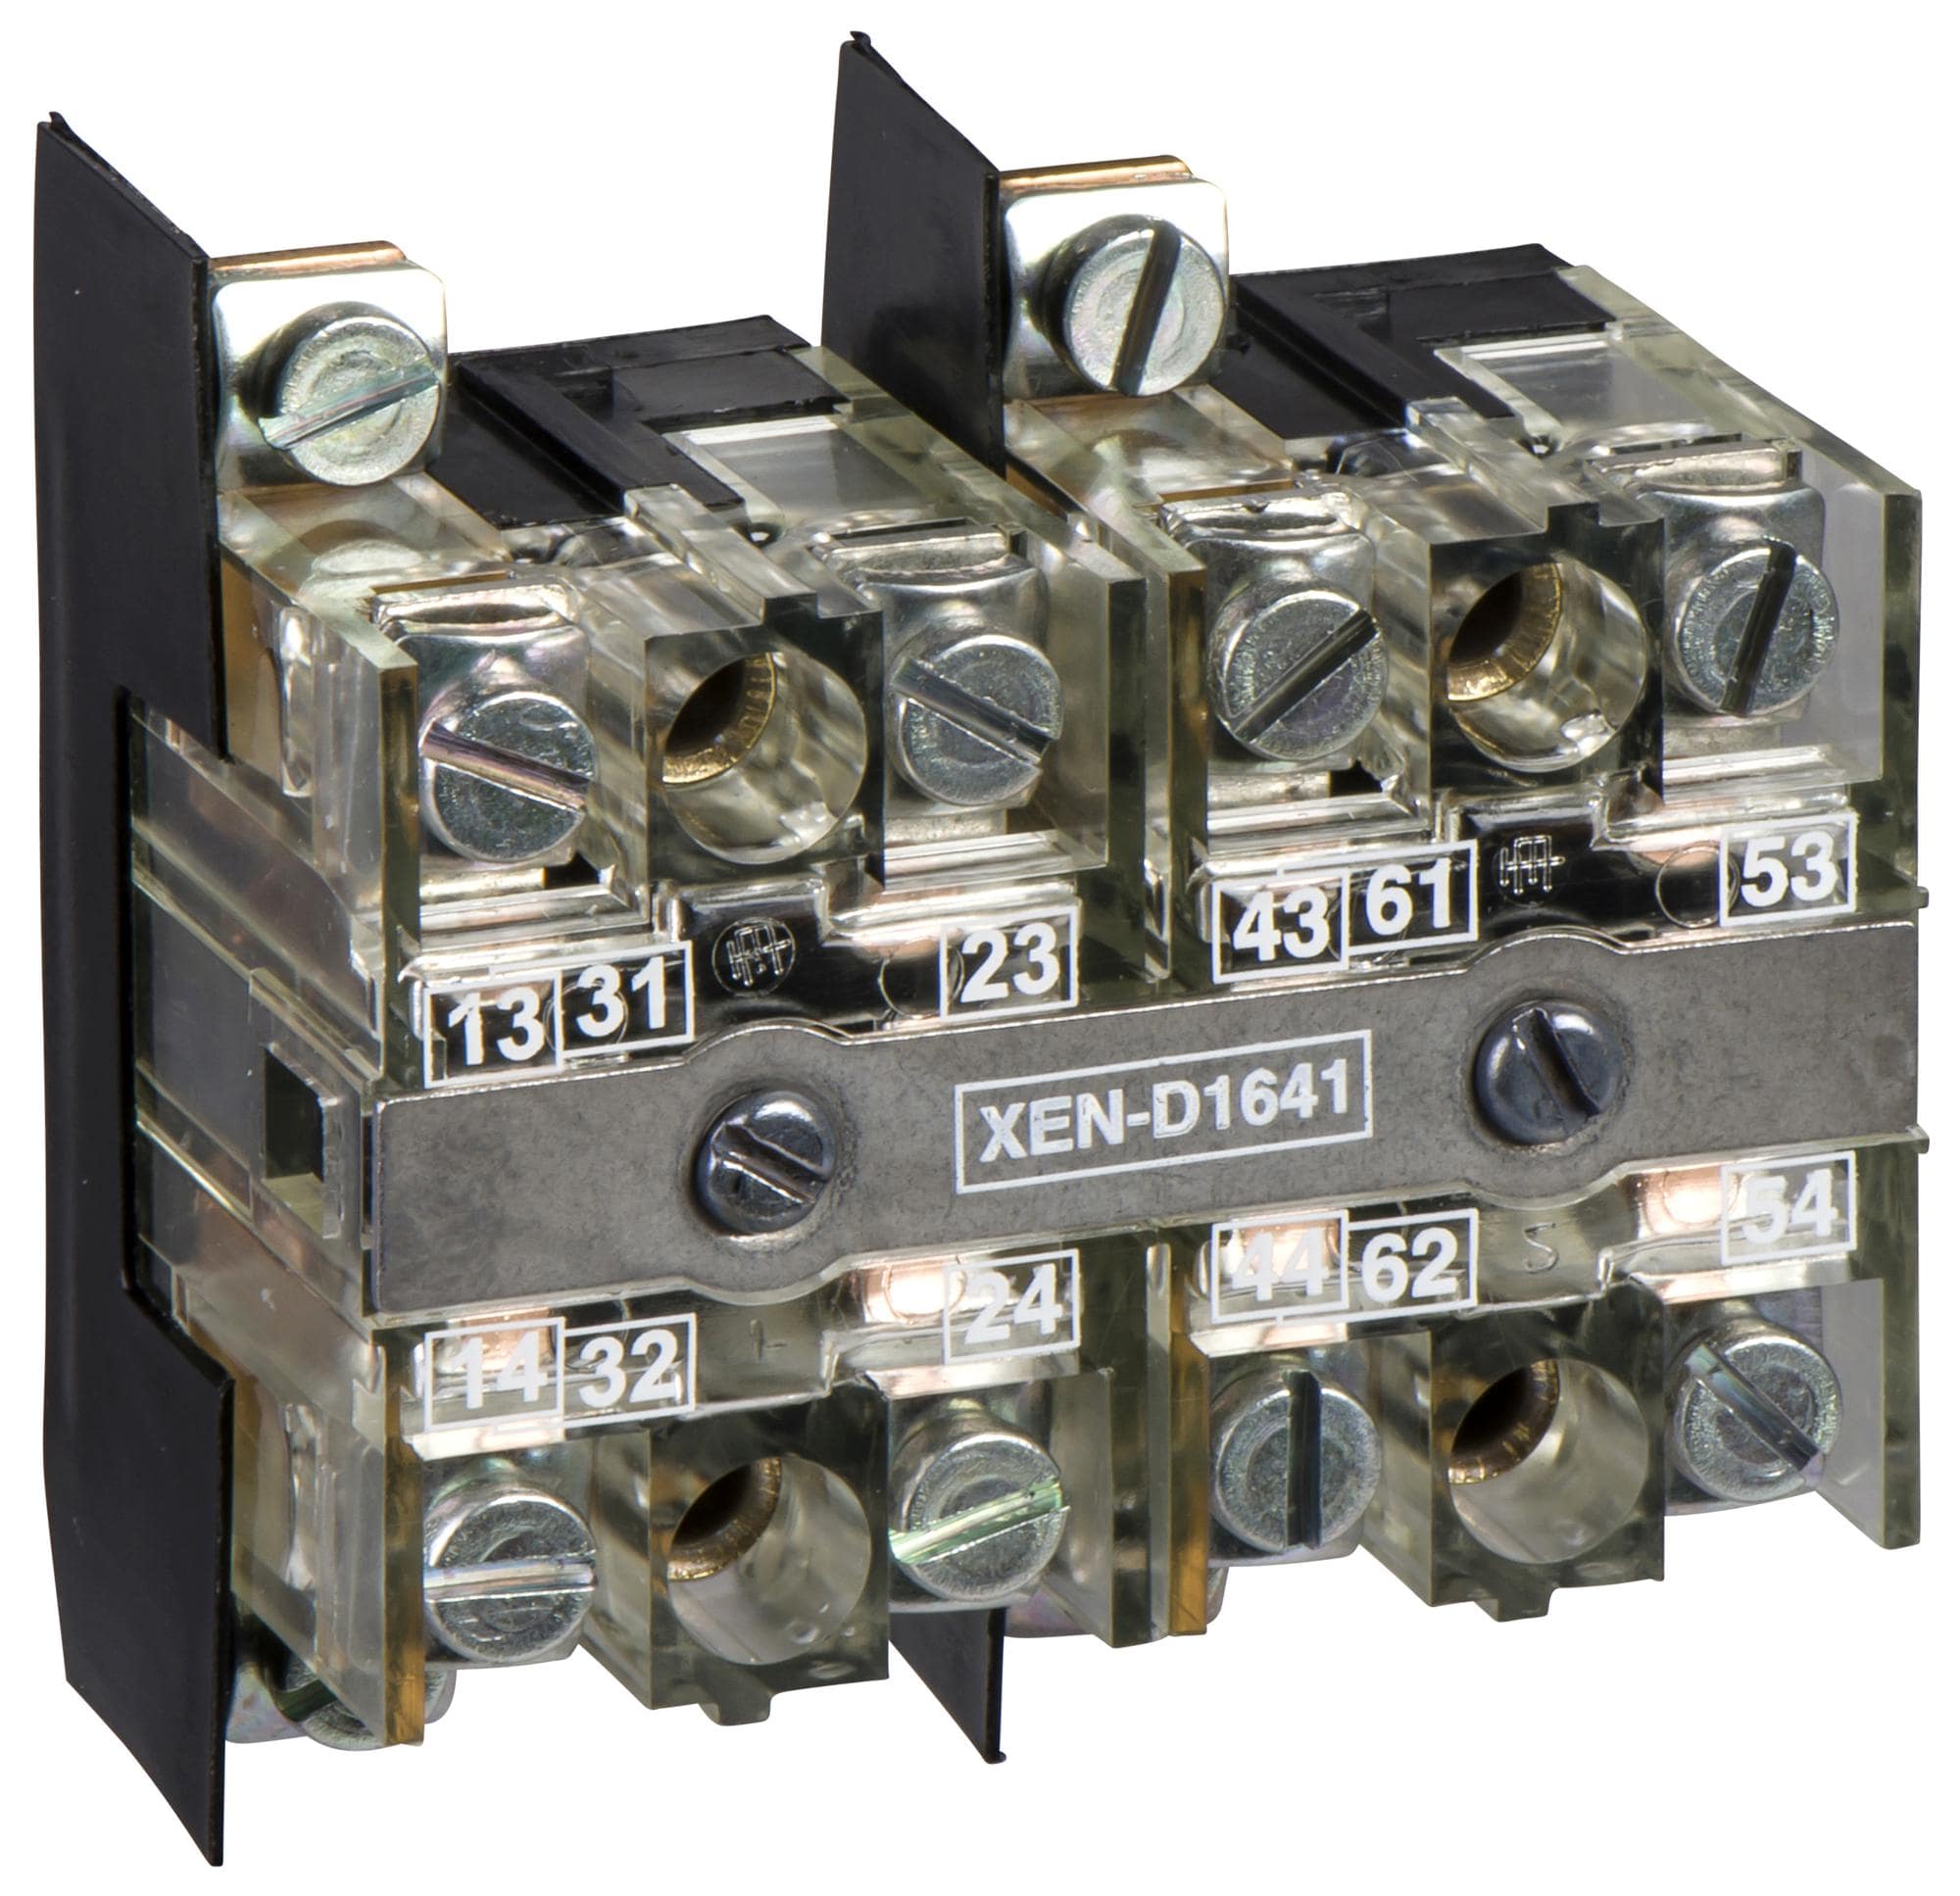 SCHNEIDER ELECTRIC Contact Blocks XEND2611 CONTACT BLOCK SCHNEIDER ELECTRIC 3114859 XEND2611